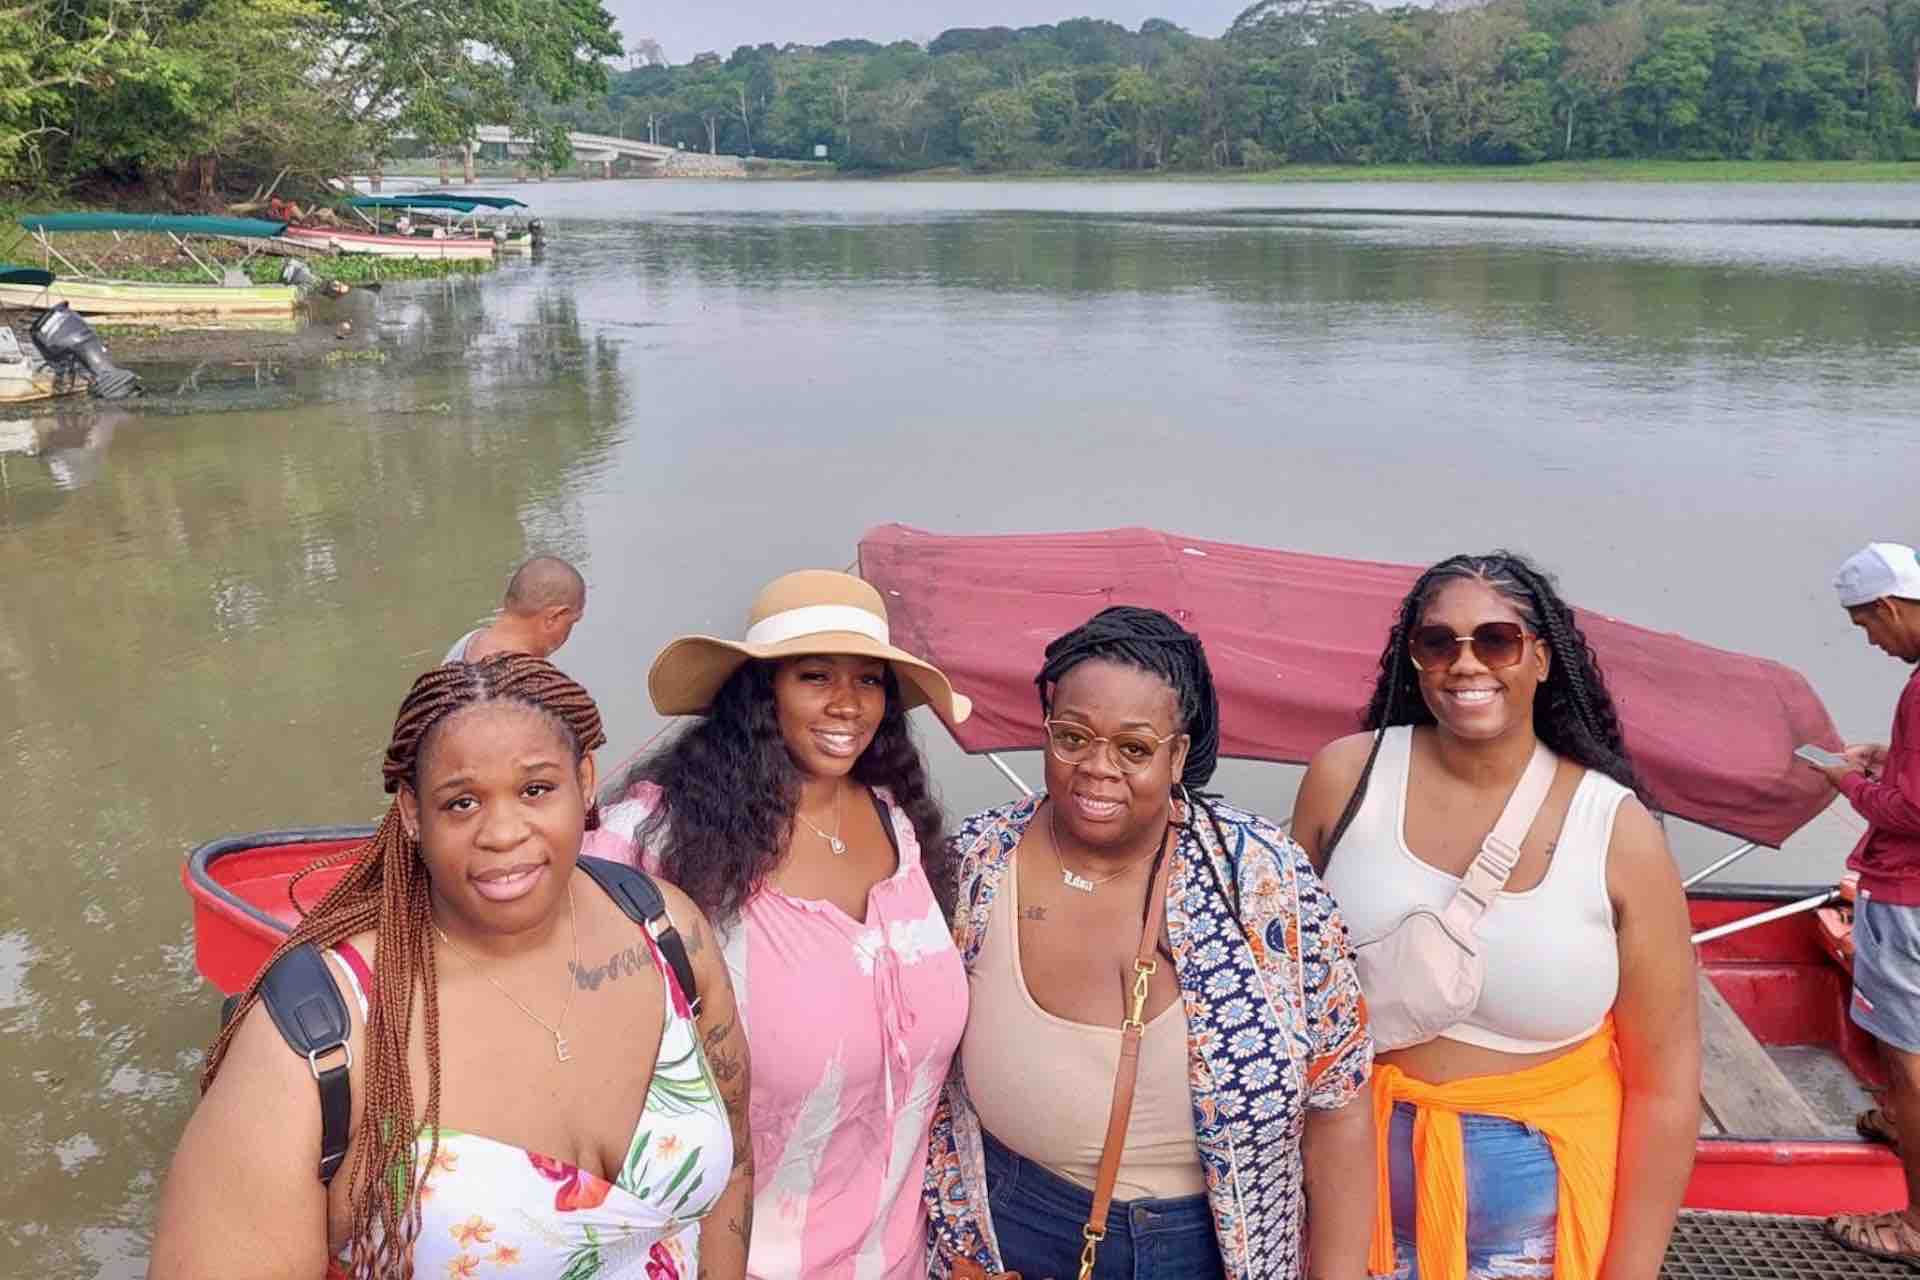 monkey island panama tour guest group in gamboa rio chagres boat dock